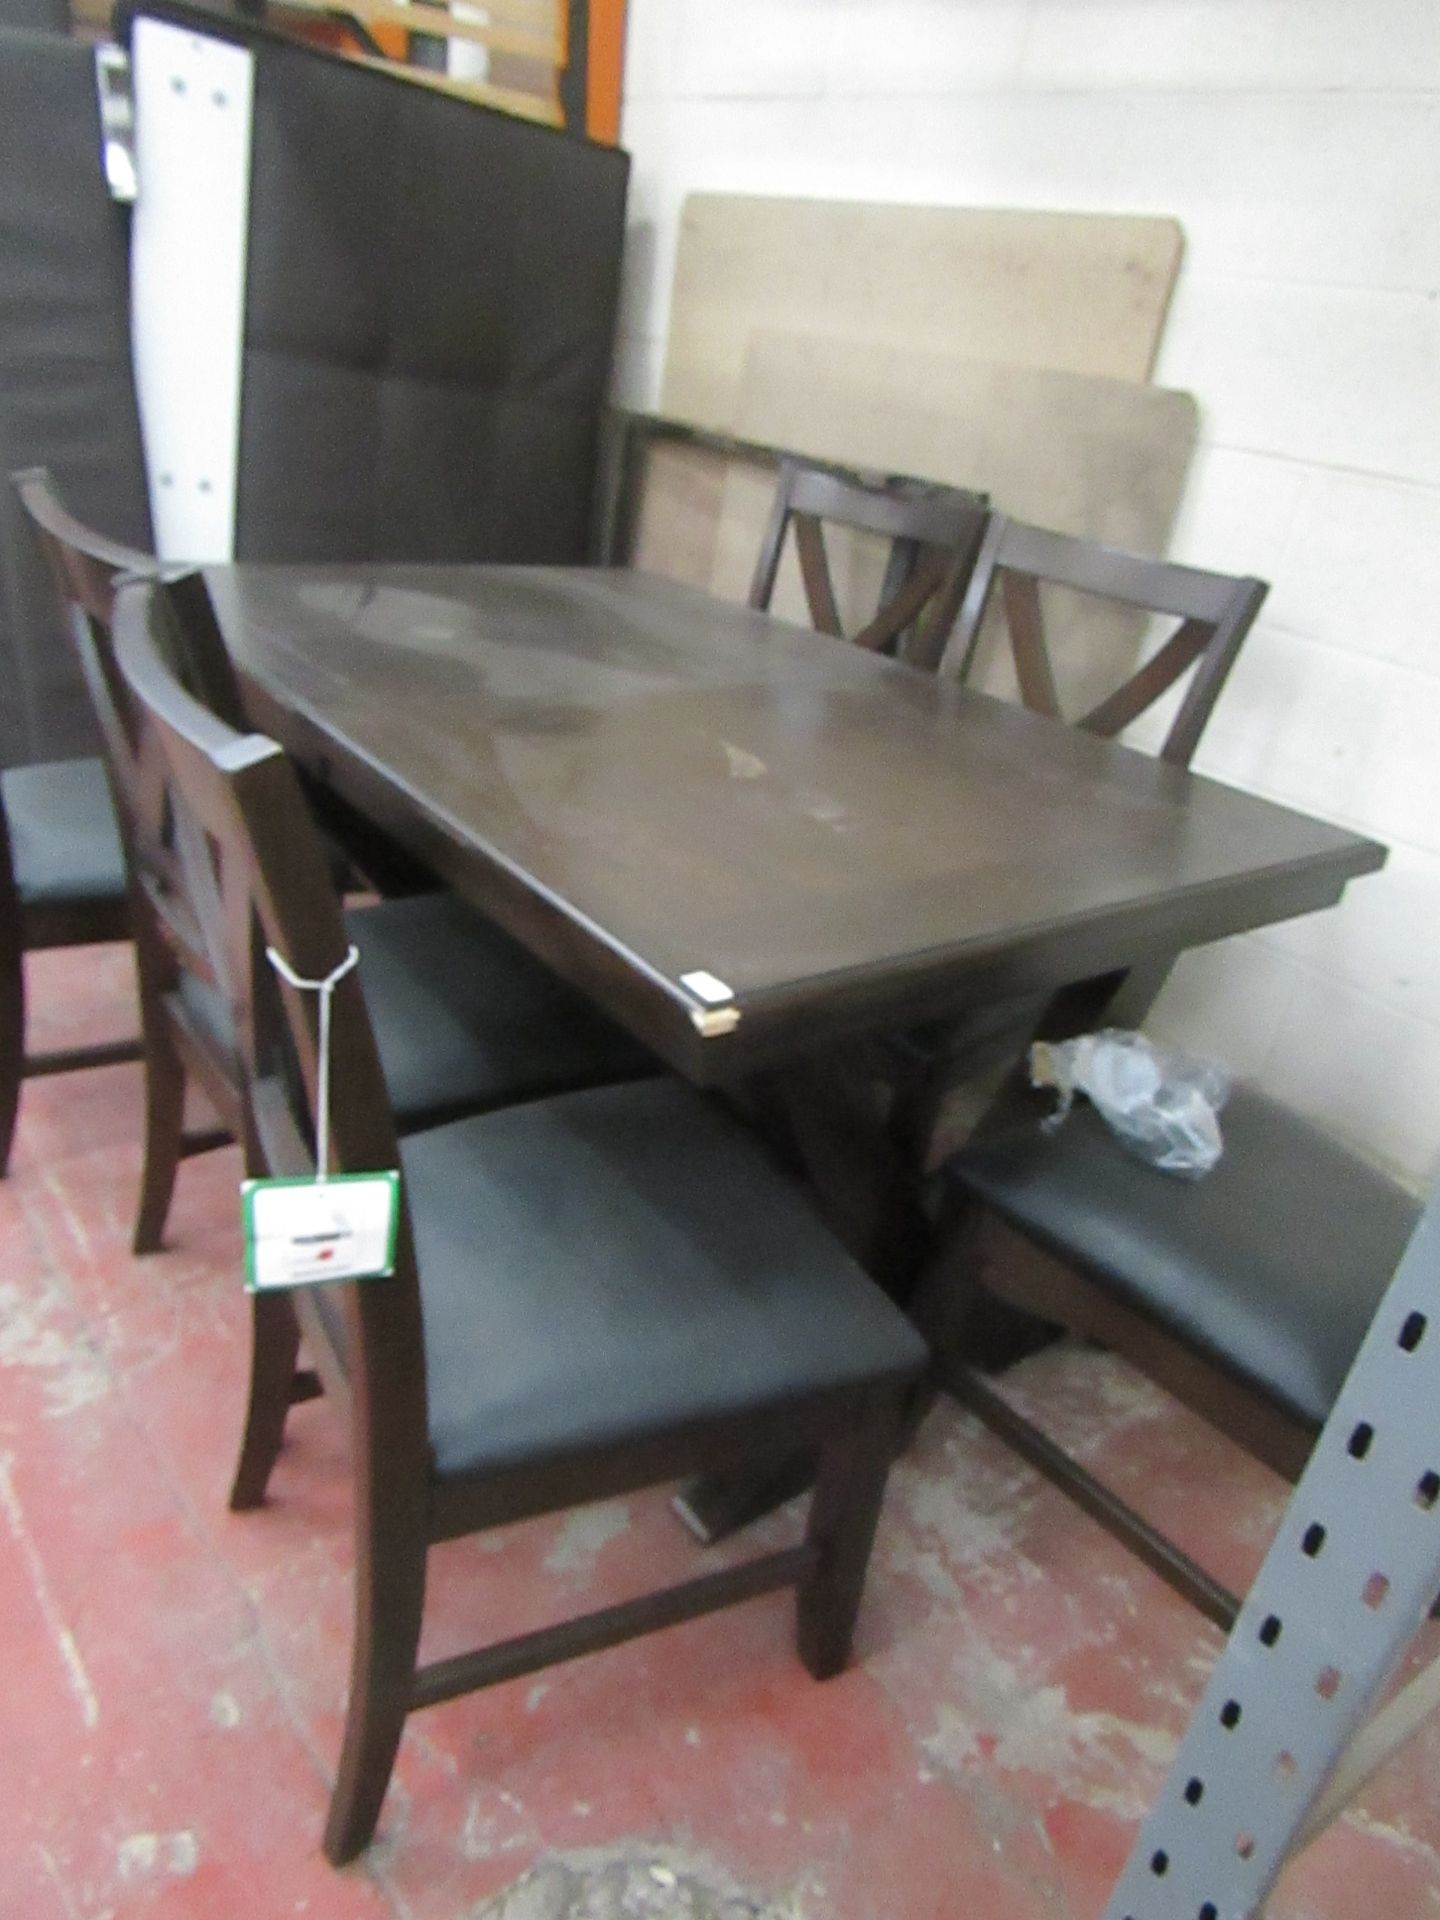 Bayside Funishings 6 seater extending dining table, comes with a bag of fixings for the table, the